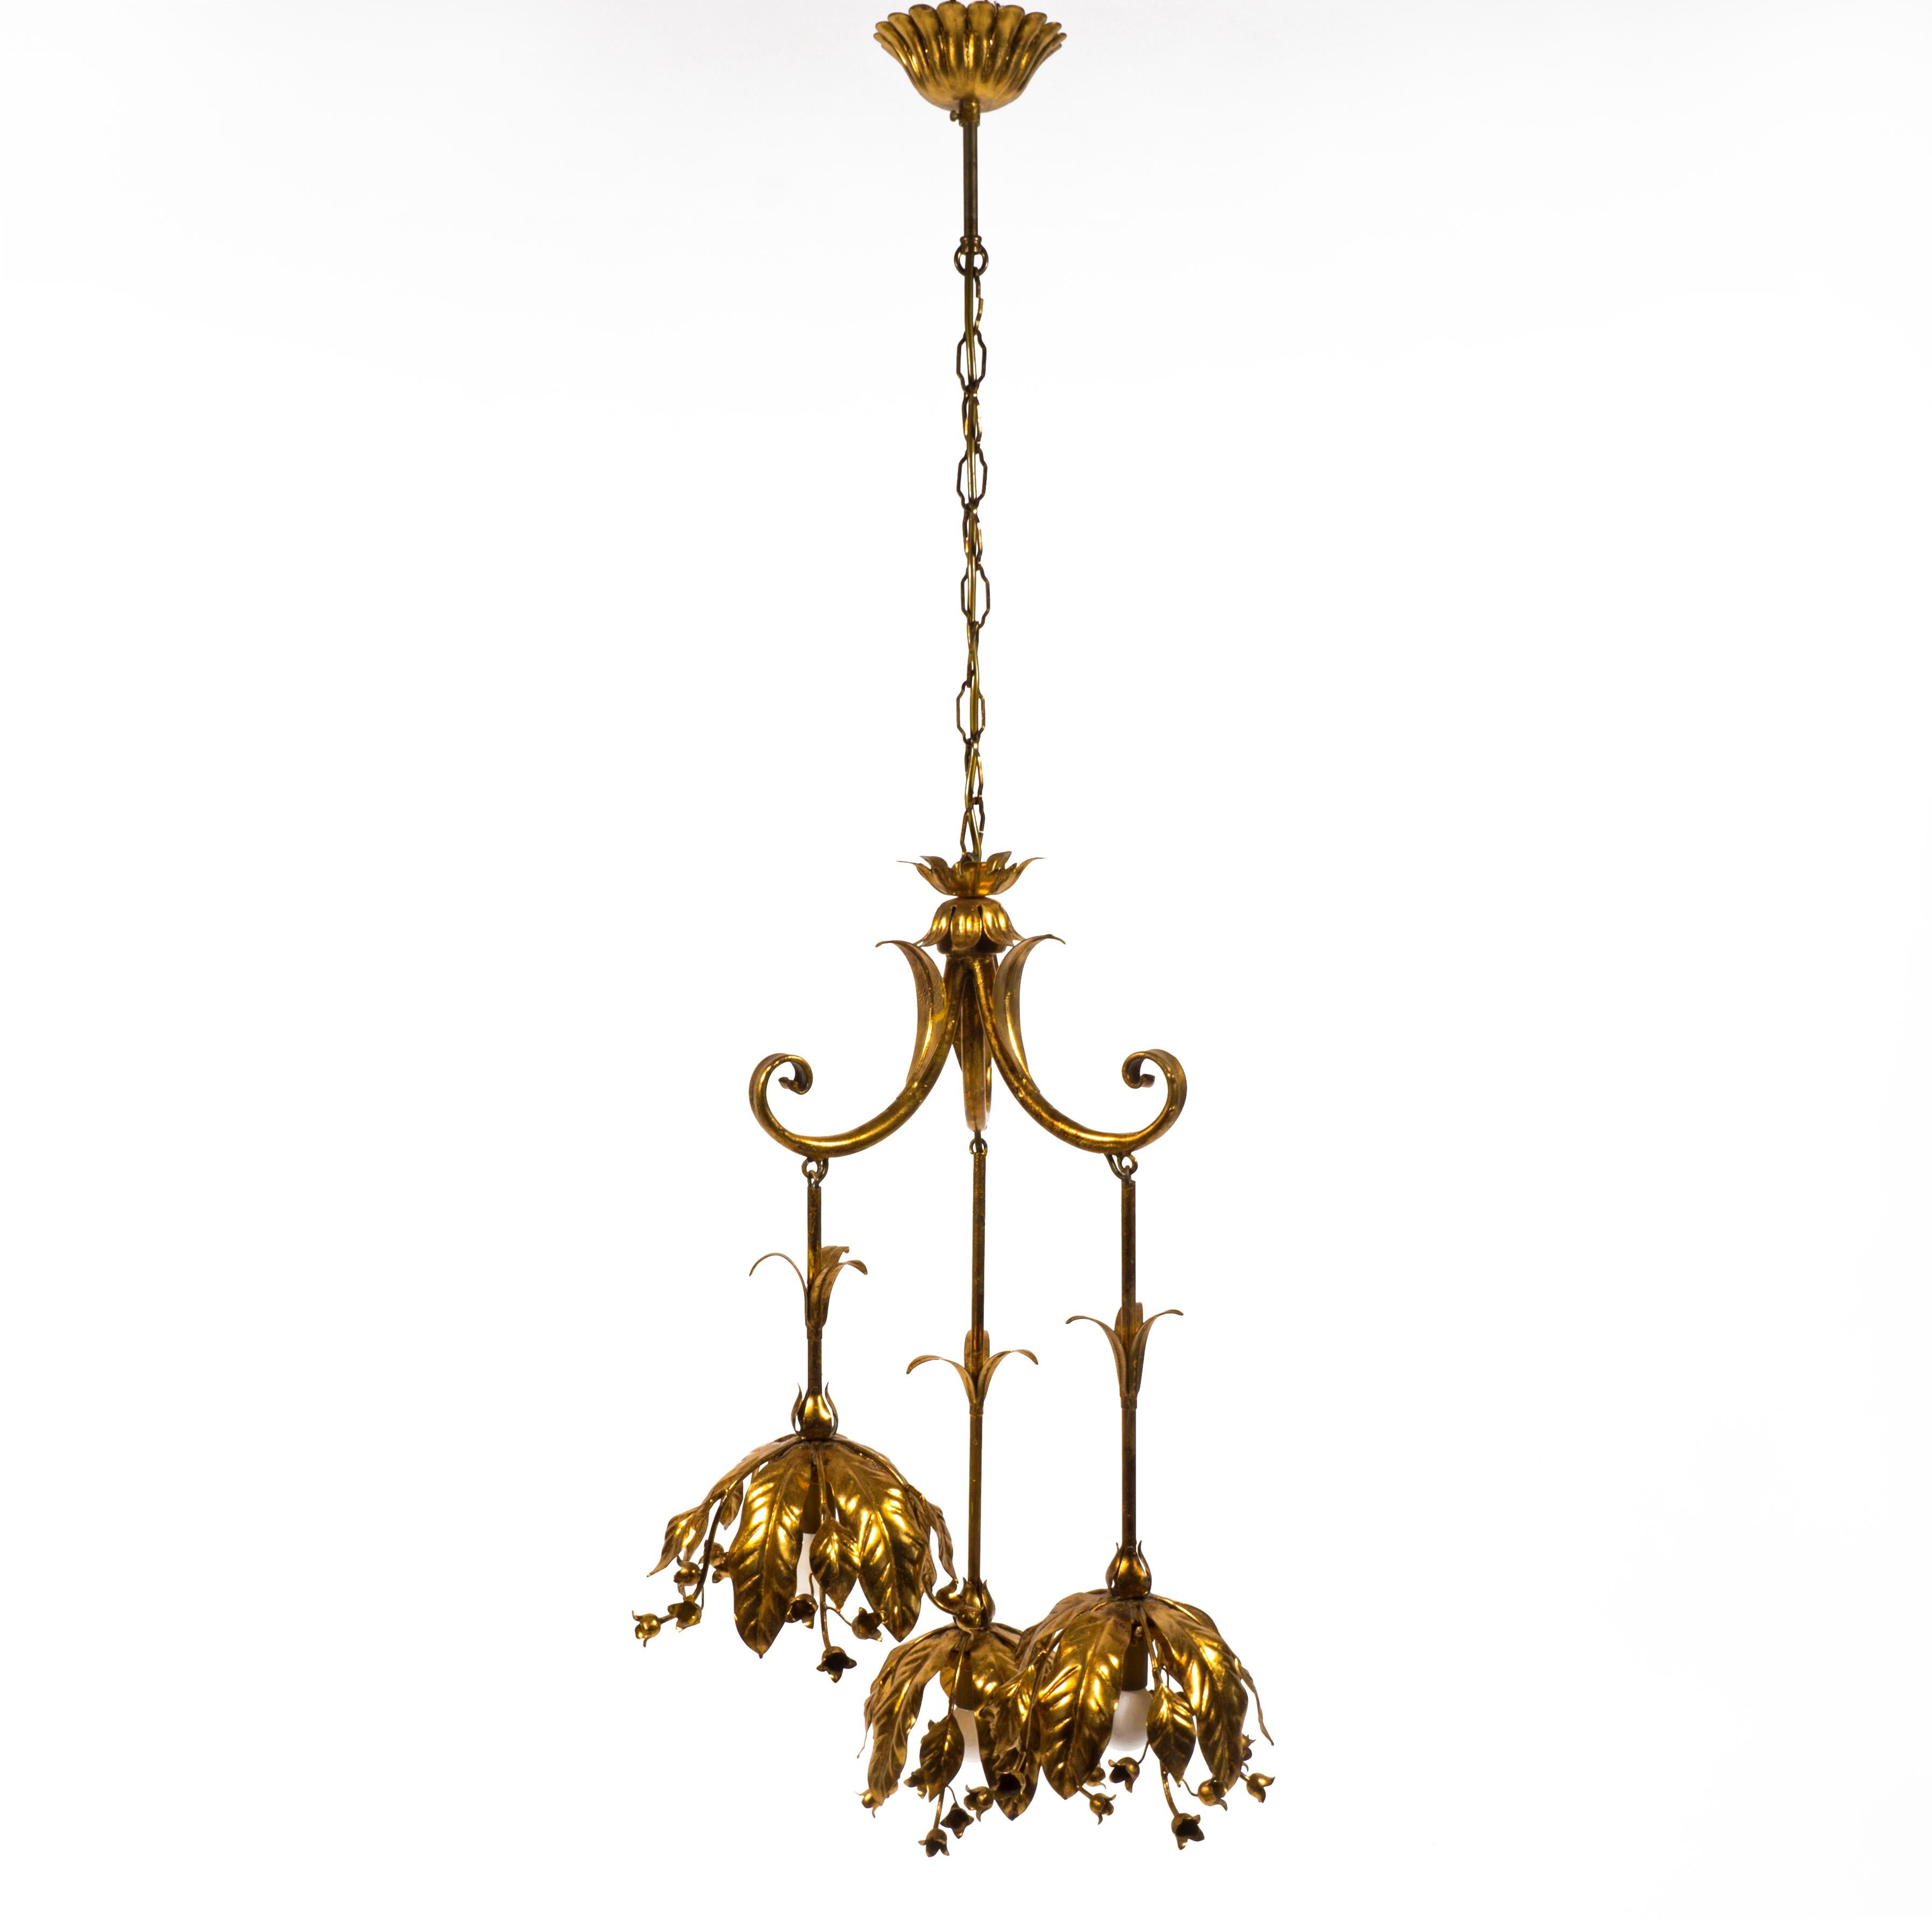 Highly decorative floral Hollywood Regency ceiling light by Banci Firenze from the 1970s.
The gold leaf pendant light by Banci Firenze from Italy has three hanging flower heads, each decorated with beautifully shaped leaves and flowers. The